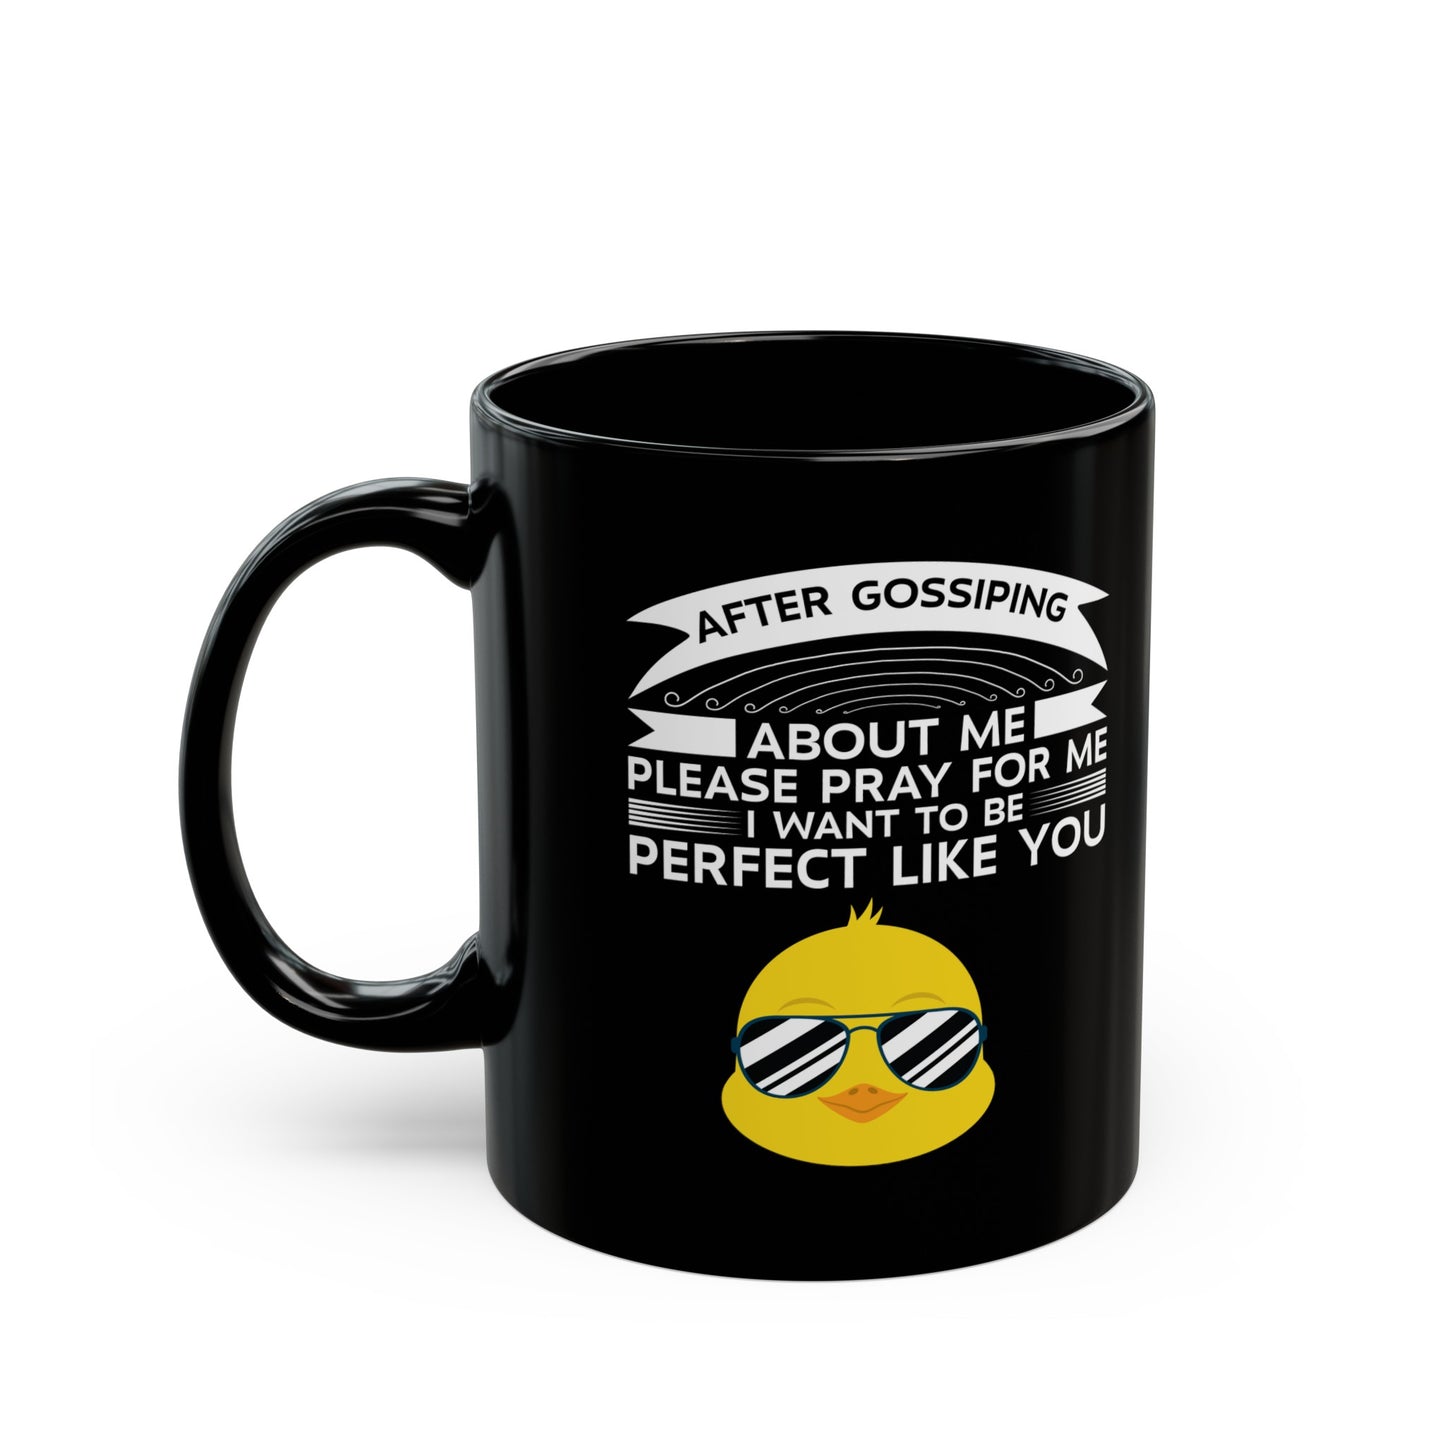 After Gossiping About Me Please Pray For Me Funny Black Ceramic Mug 11oz (double sided print)